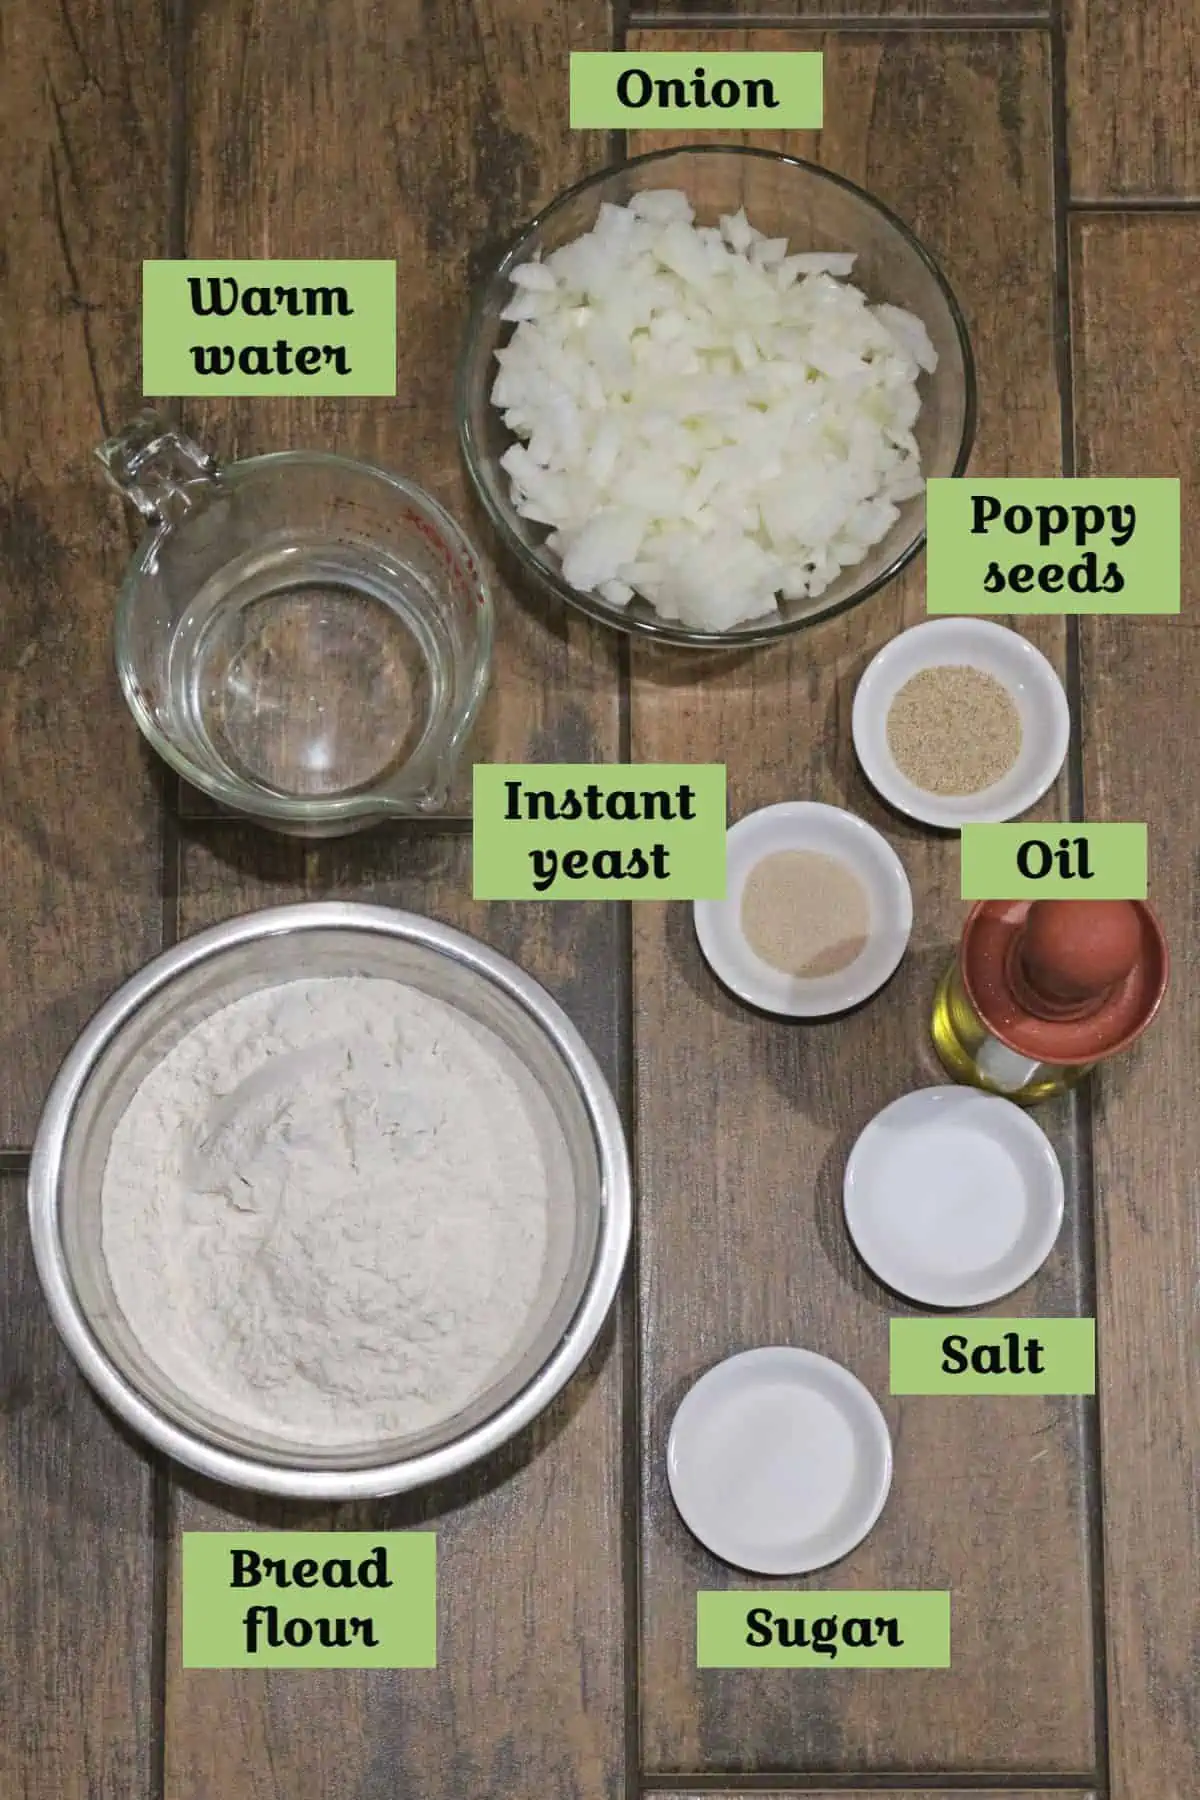 Ingredients needed to make bialy.